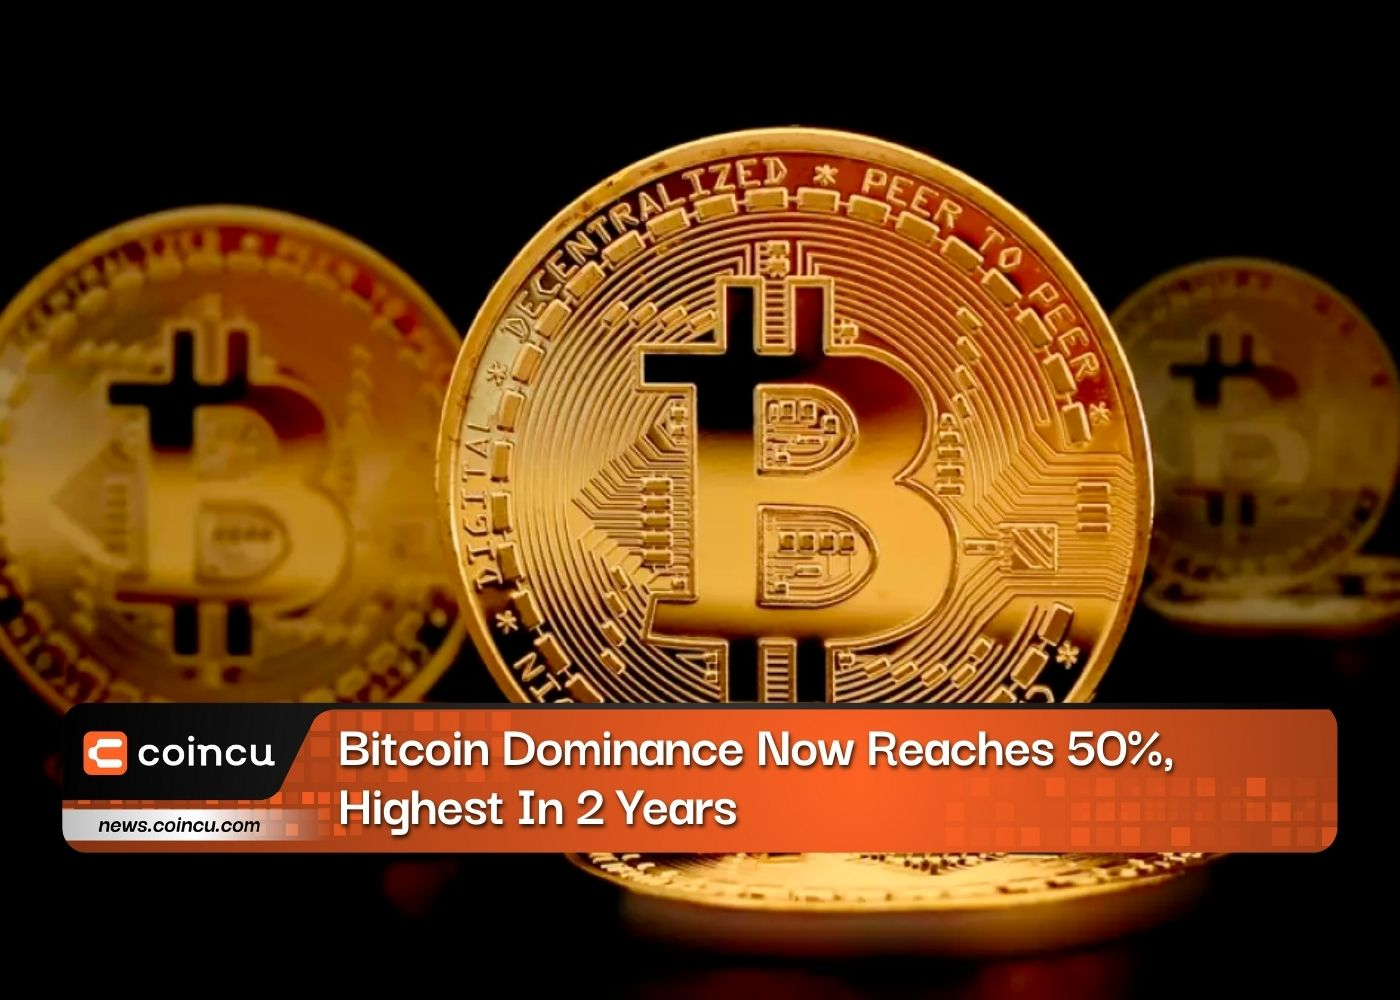 Bitcoin Dominance Now Reaches 50%, Highest In 2 Years